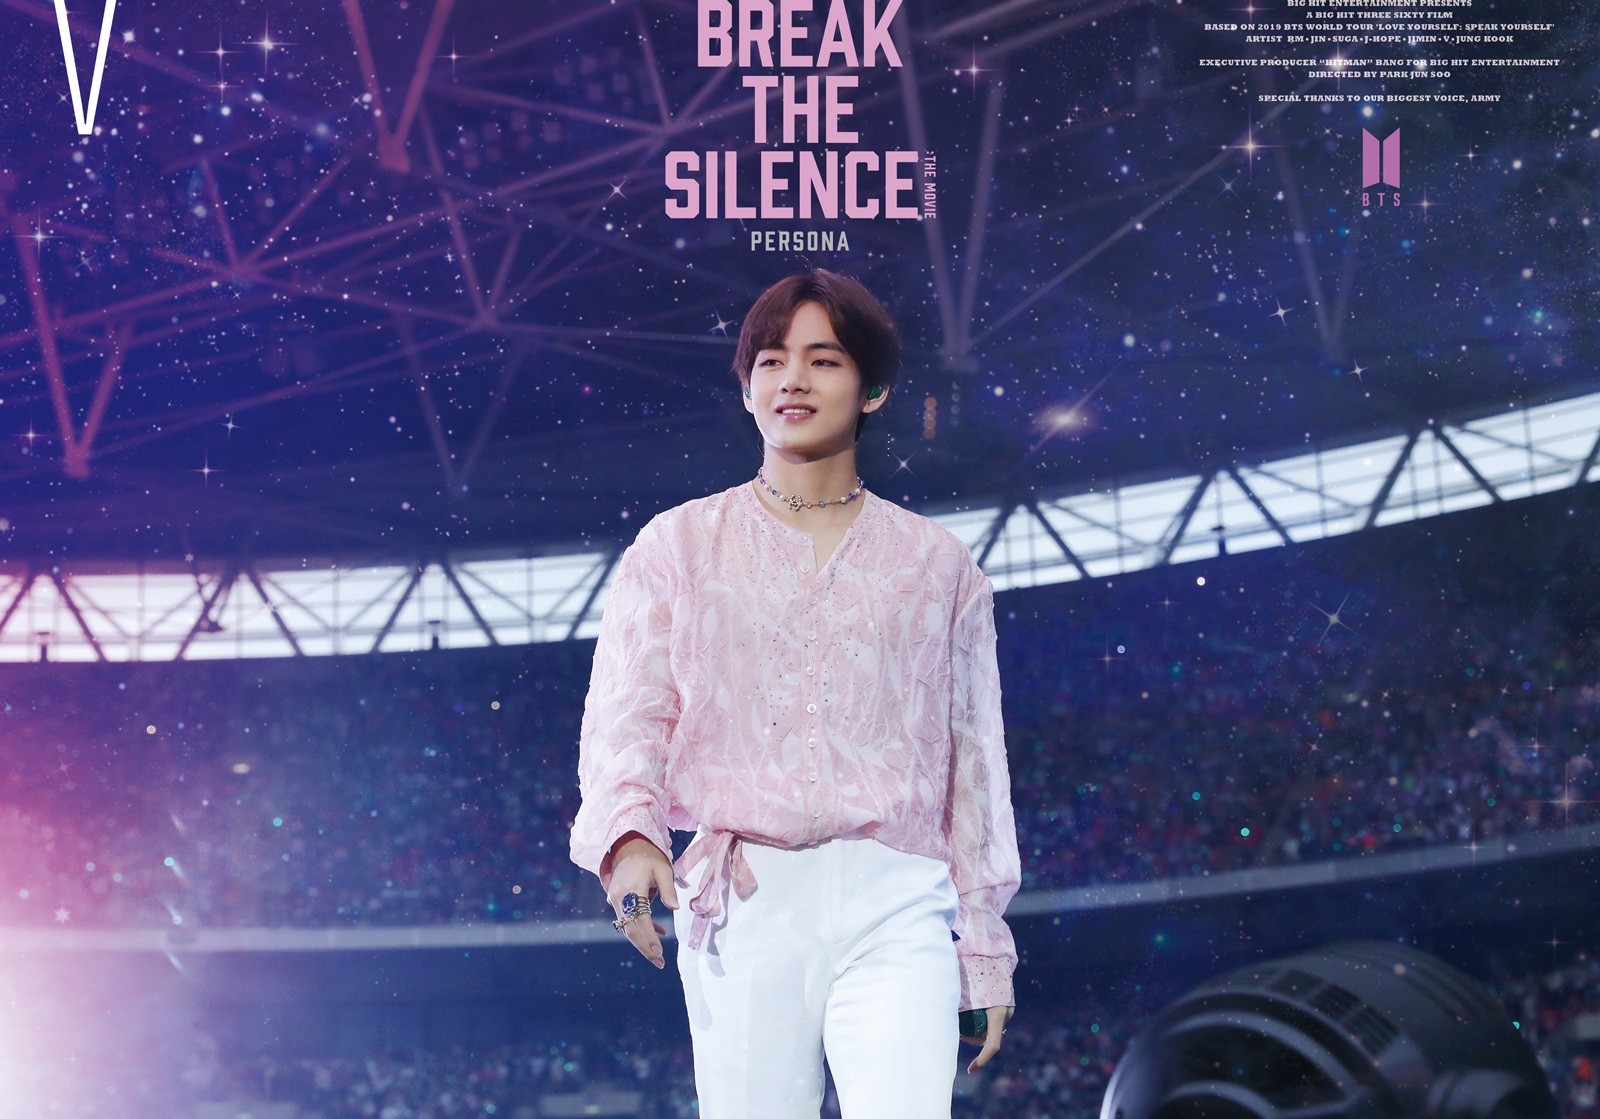 Break The Silence: The Movie Wallpapers